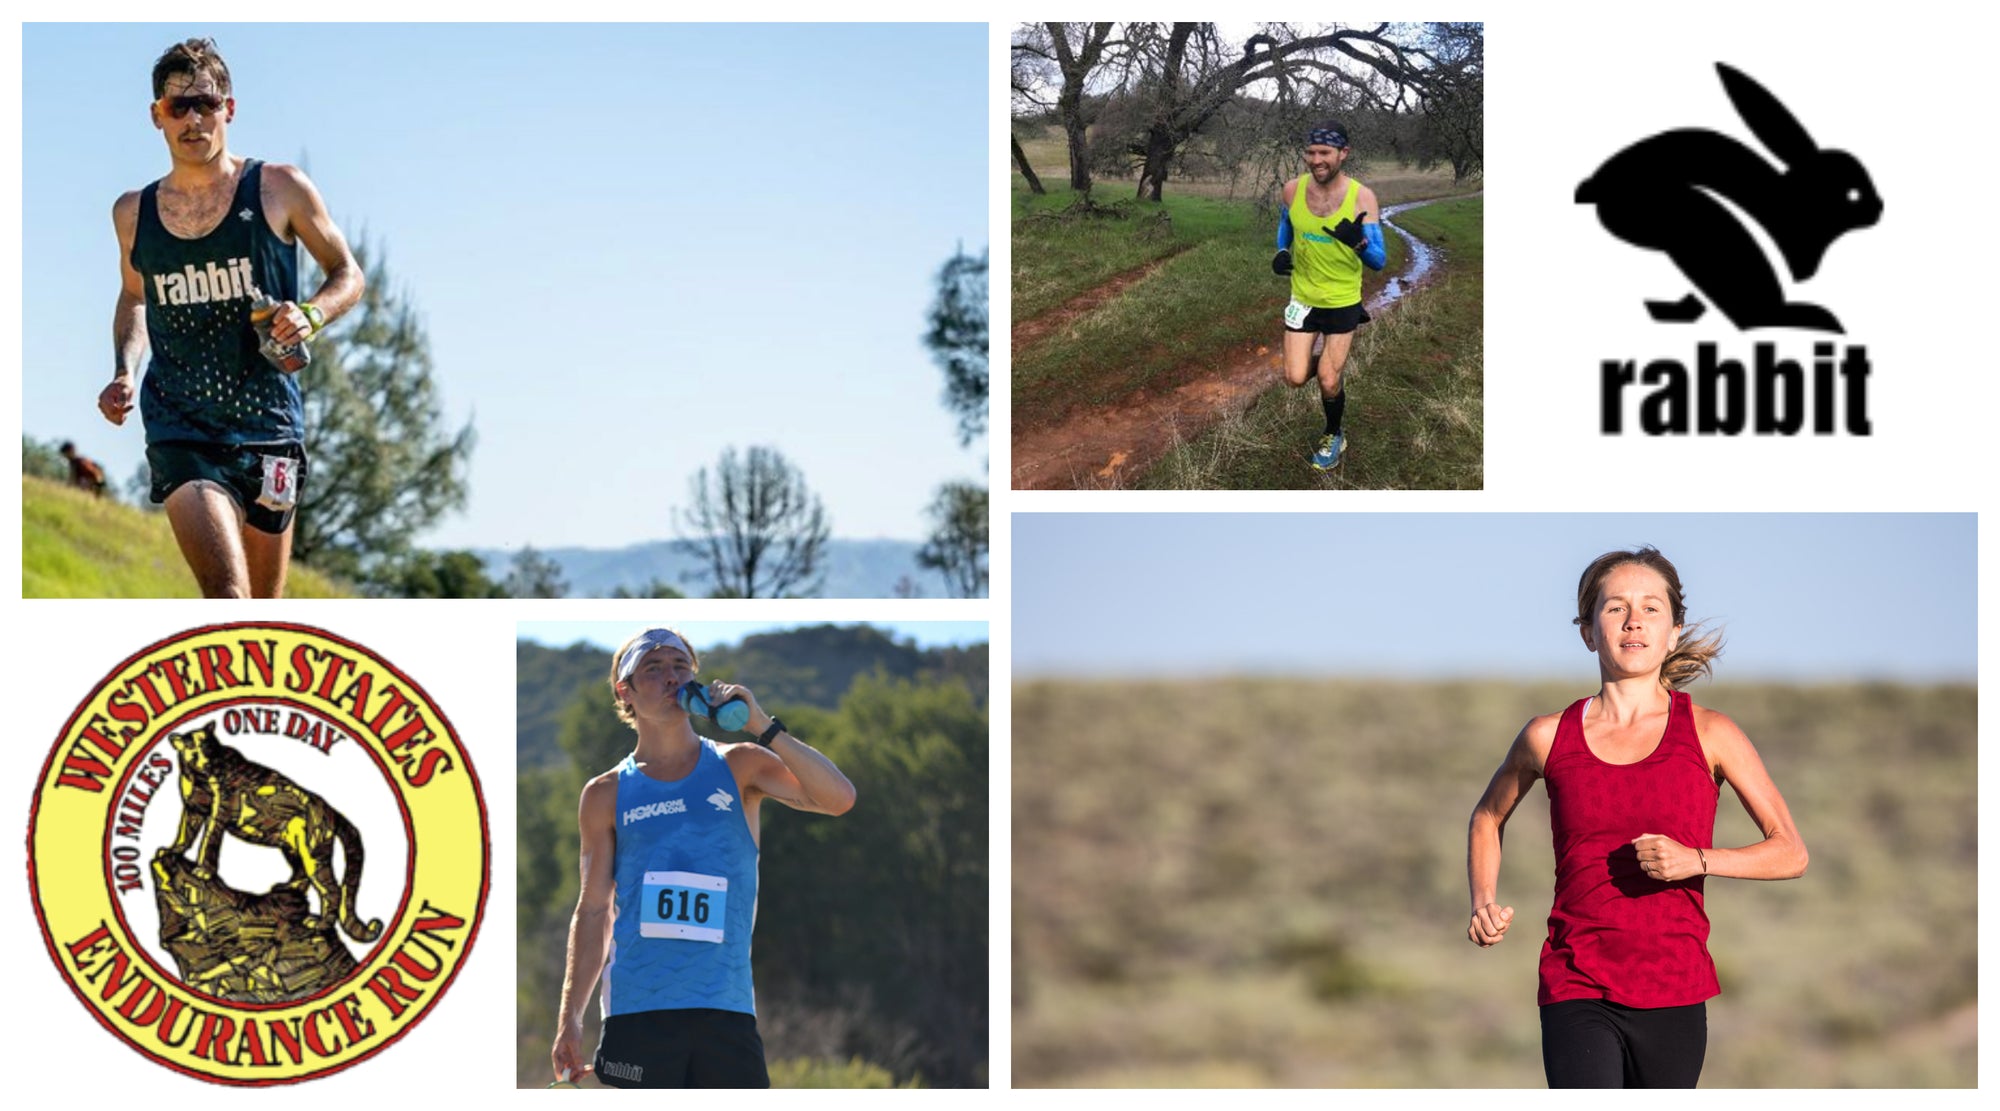 2018 rabbit Western States 100 Preview Part 1